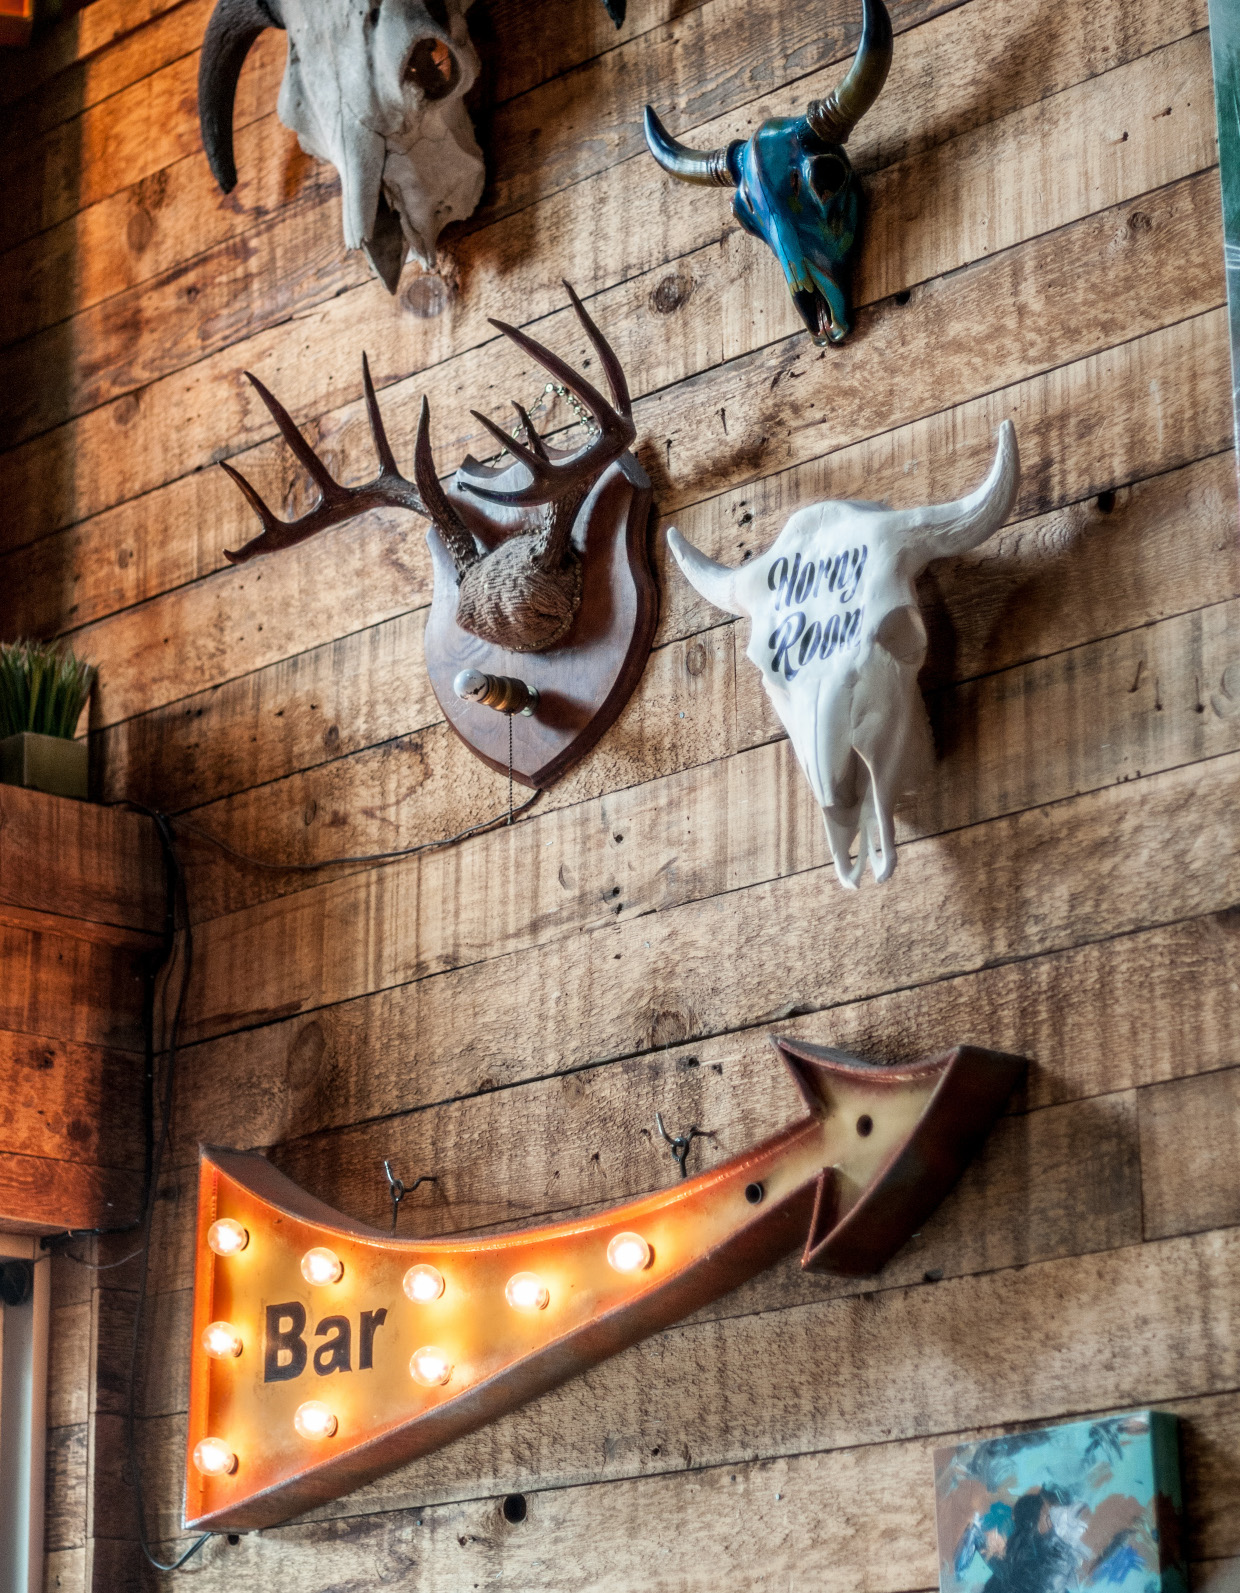 Decorative skulls and antlers mounted on the wall.